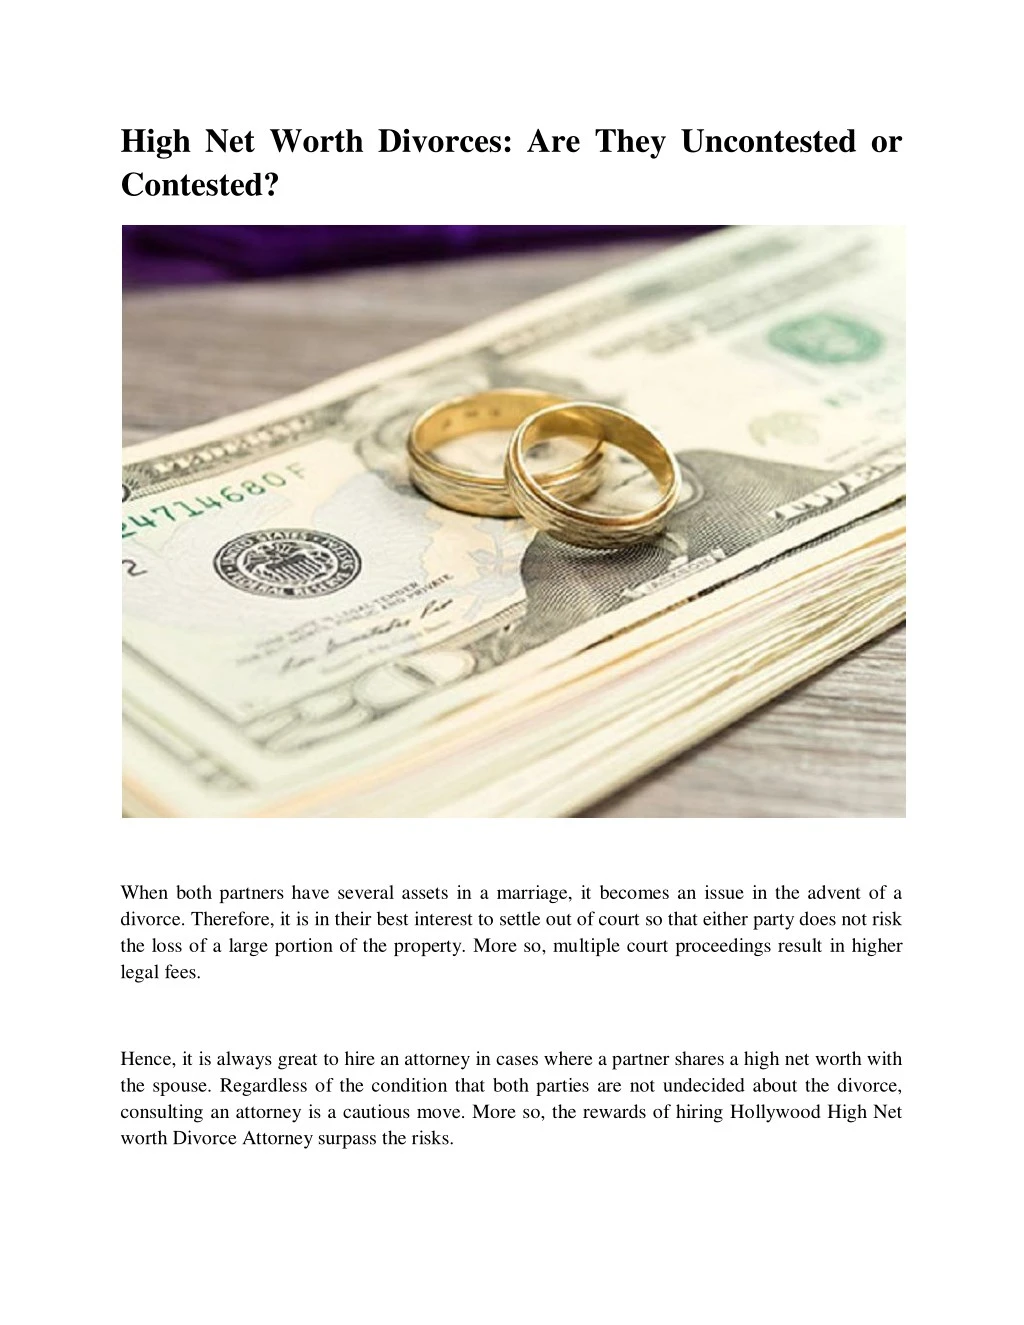 high net worth divorces are they uncontested